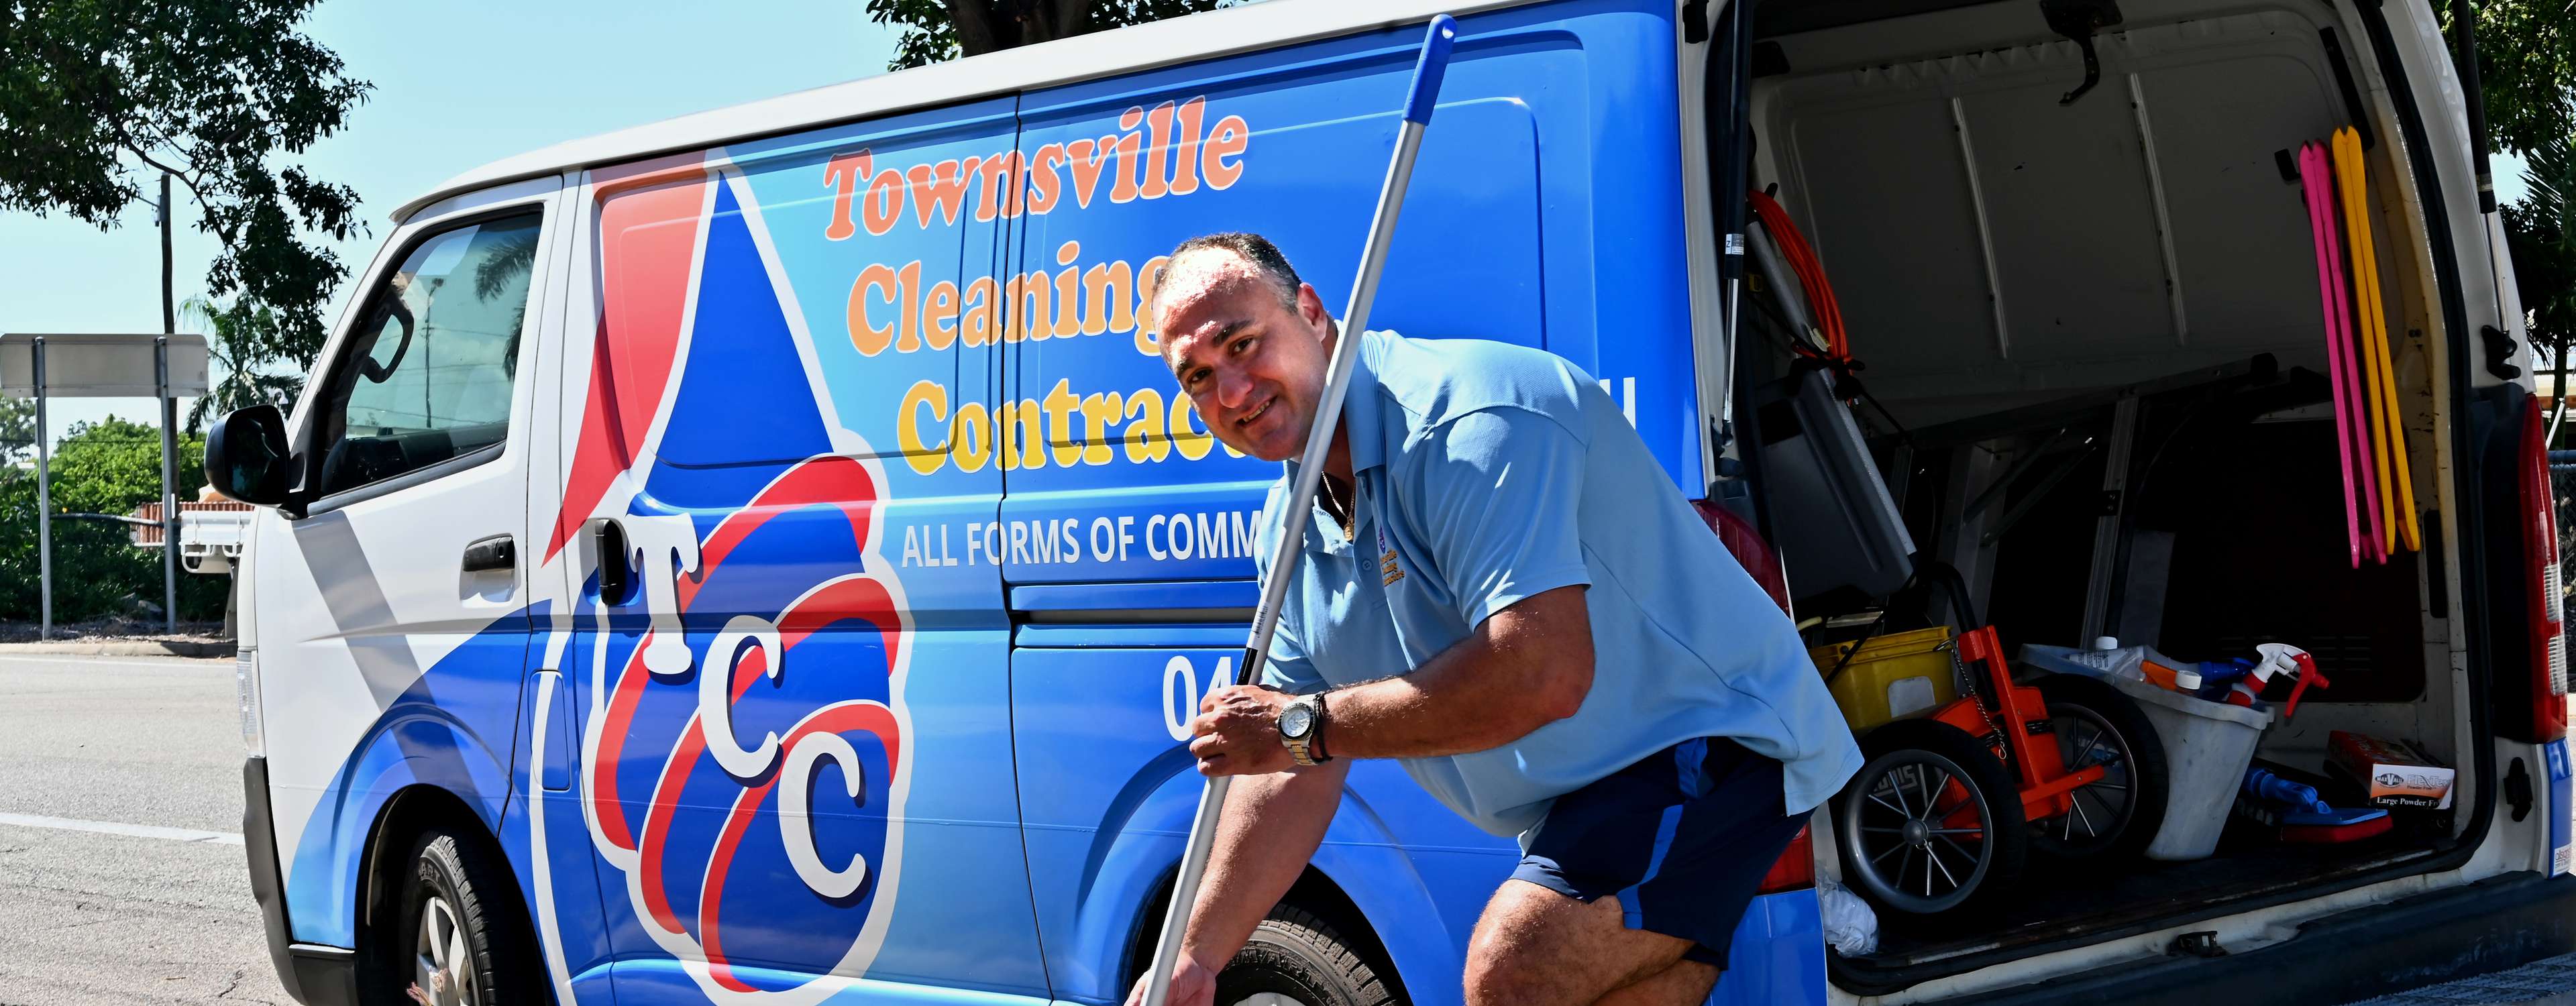 Townsville Childcare Cleaning